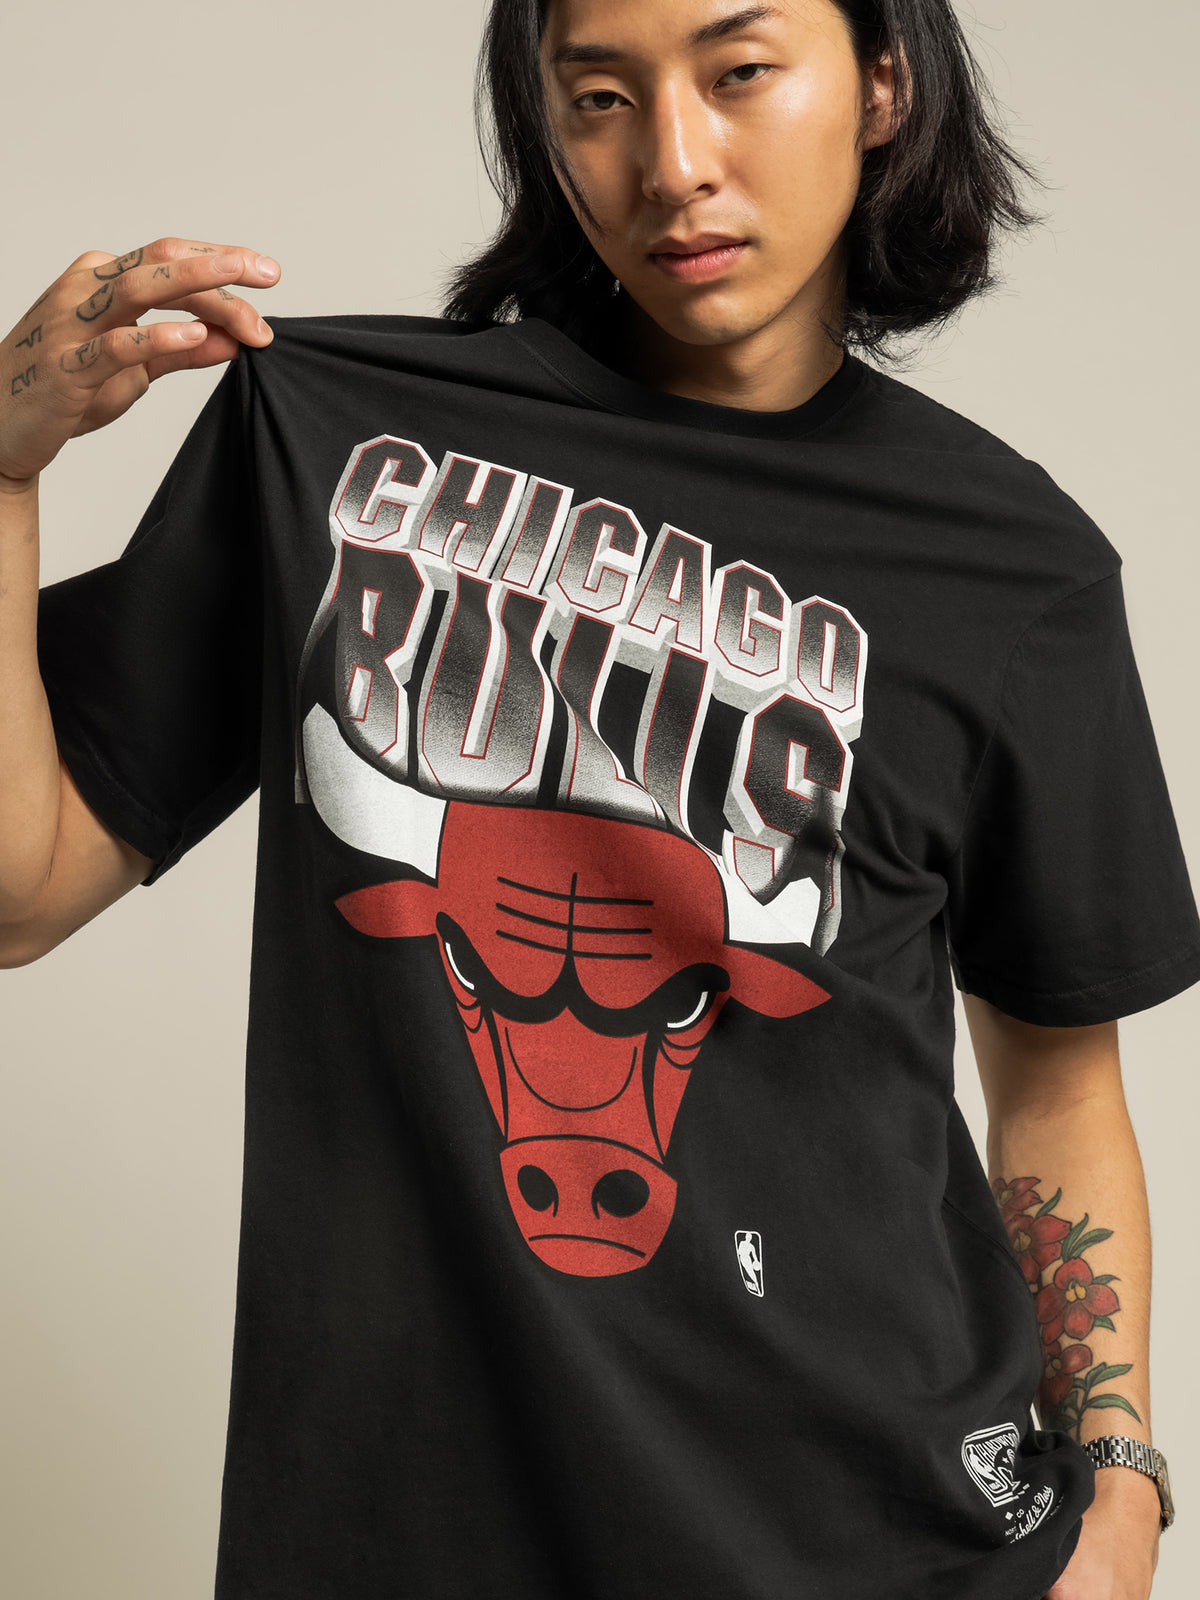 Chicago Bulls T-Shirt in Faded Black